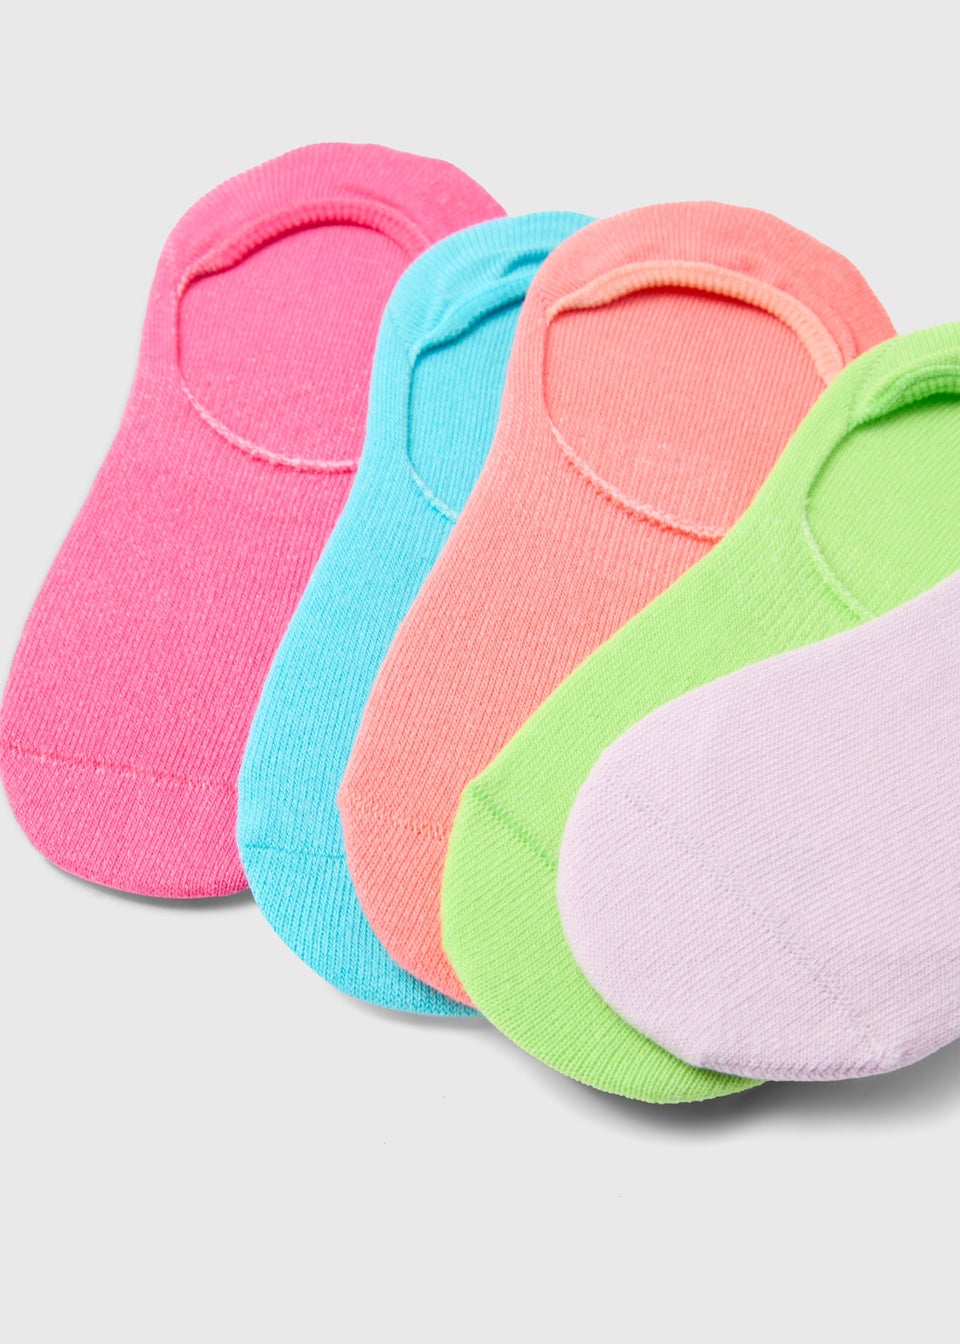 Girls 5 Pack Multicolour Neon Invisible Socks (2-12yrs)